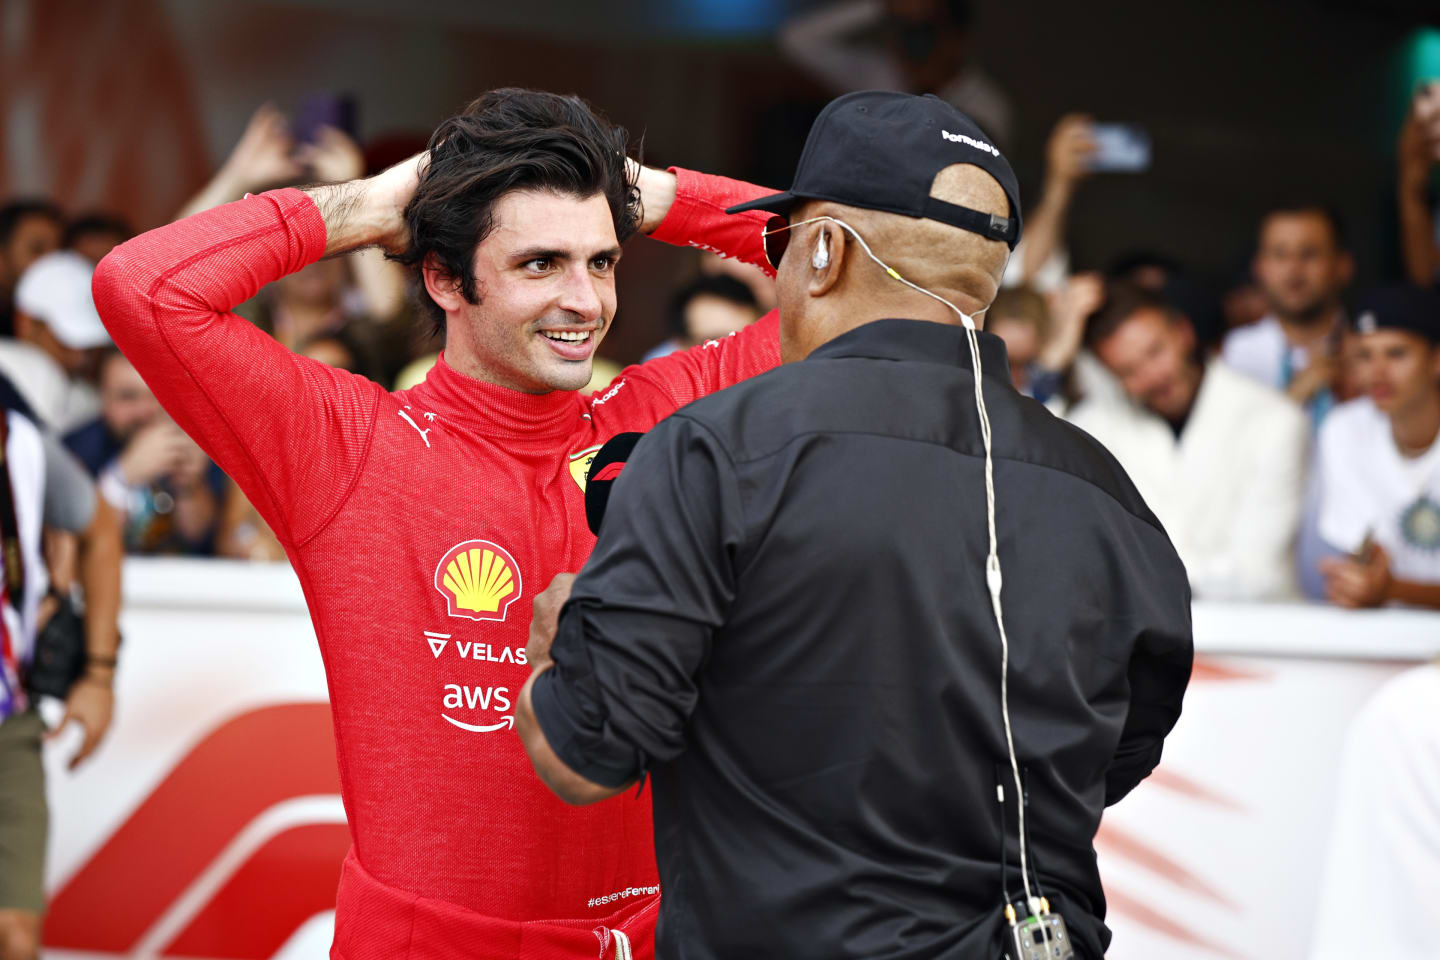 MIAMI, FLORIDA - MAY 08: Third placed Carlos Sainz of Spain and Ferrari talks with Willy T Ribbs in parc ferme during the F1 Grand Prix of Miami at the Miami International Autodrome on May 08, 2022 in Miami, Florida. (Photo by Jared C. Tilton/Getty Images)